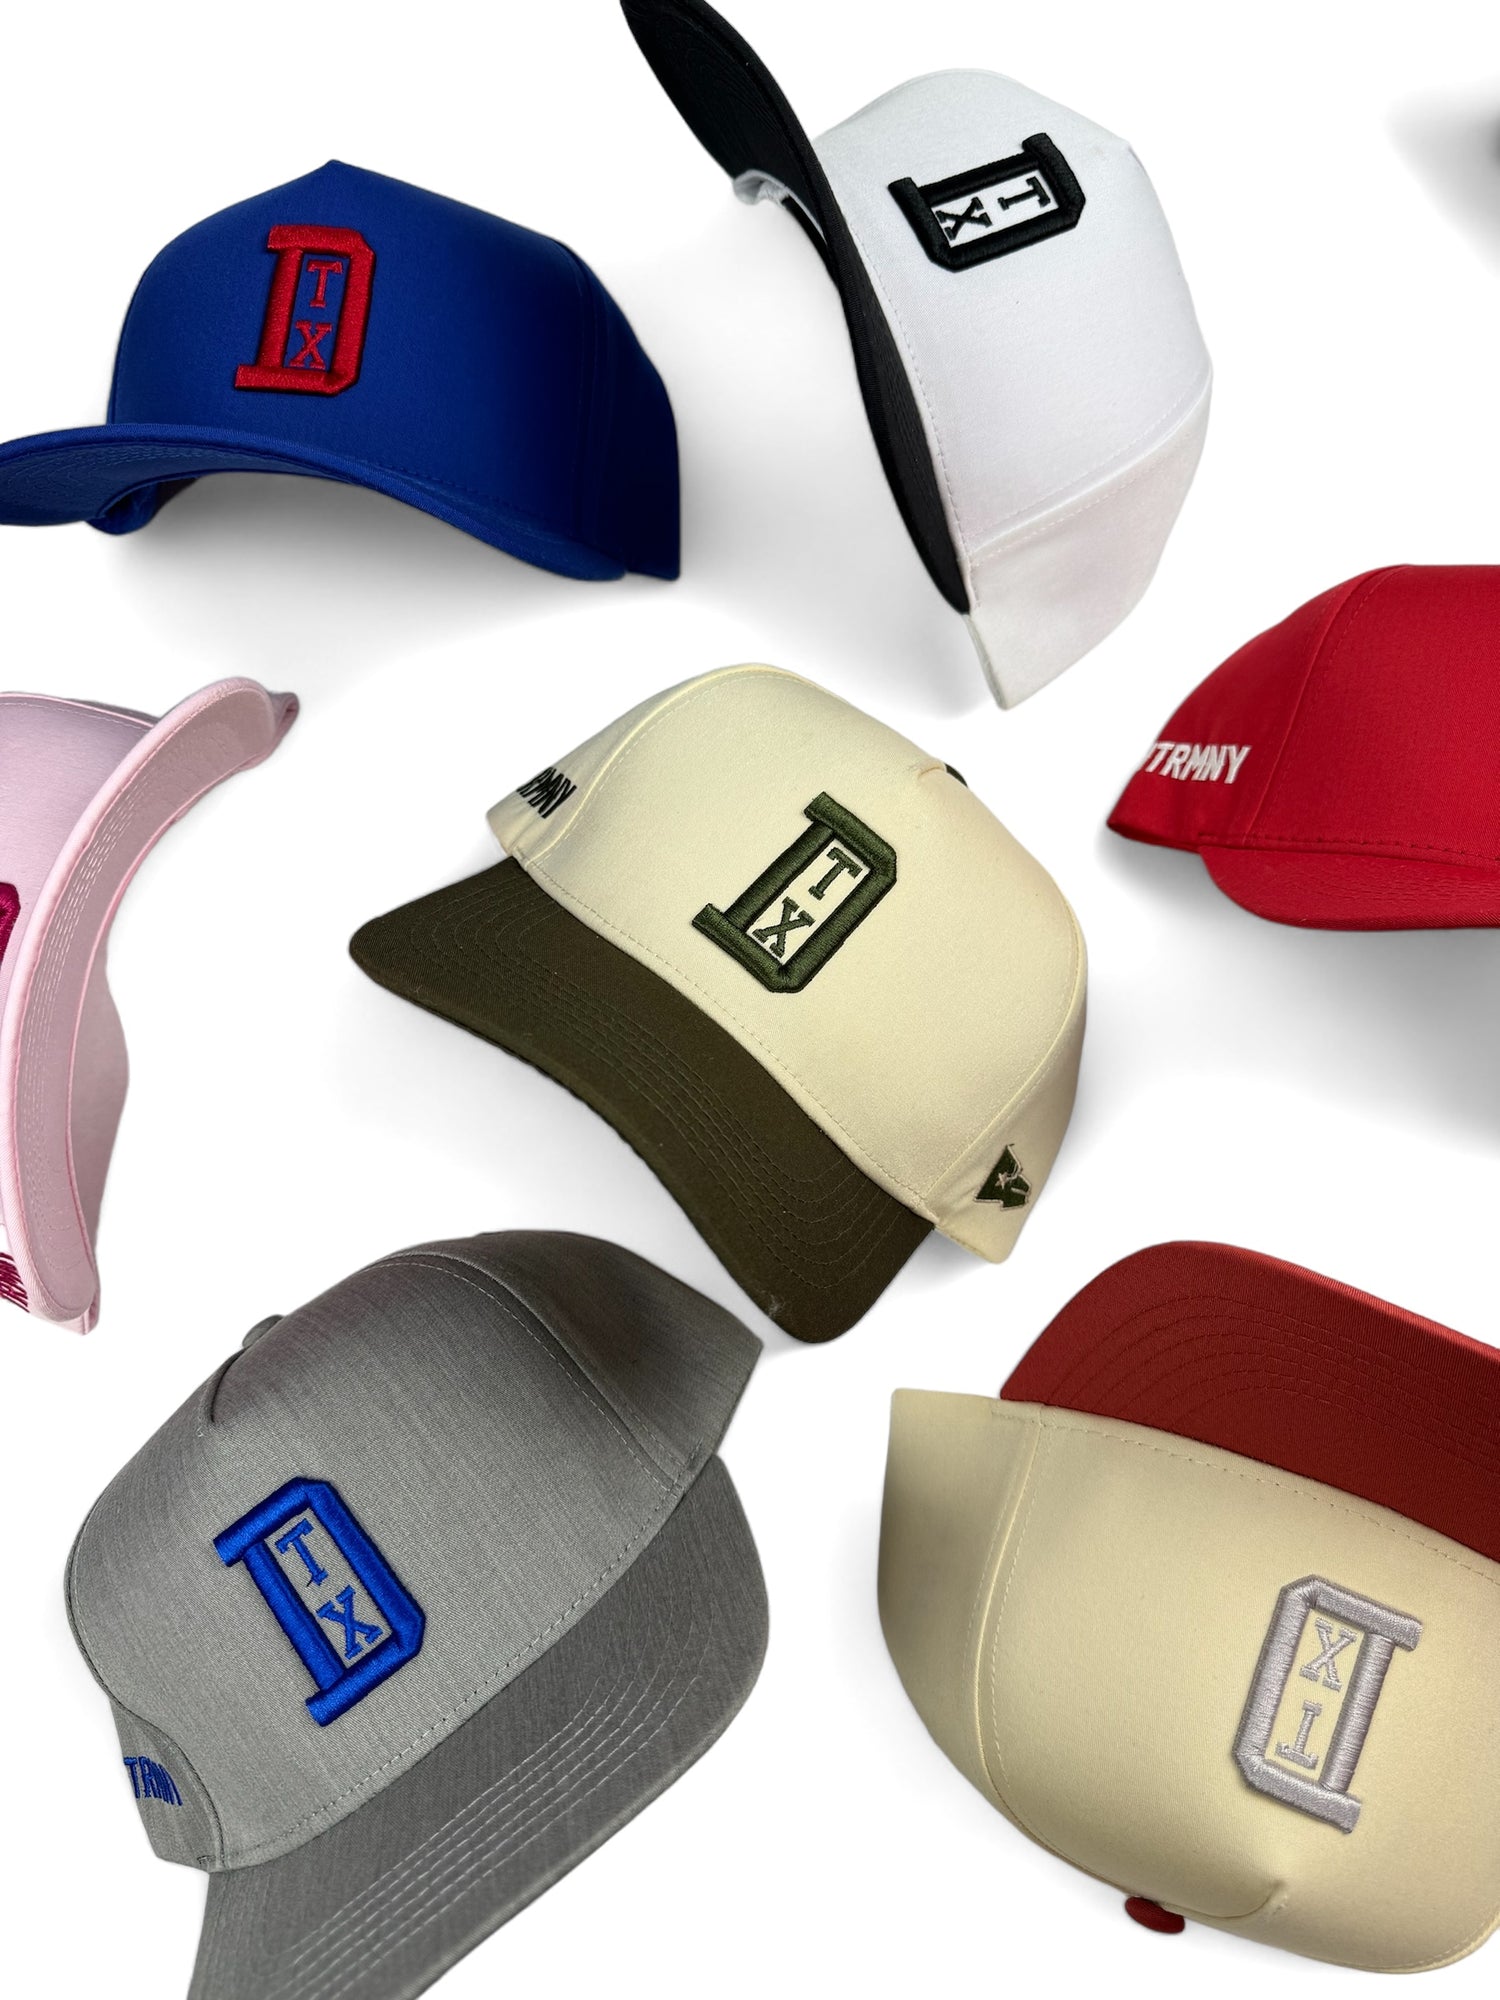 The DTX Hats